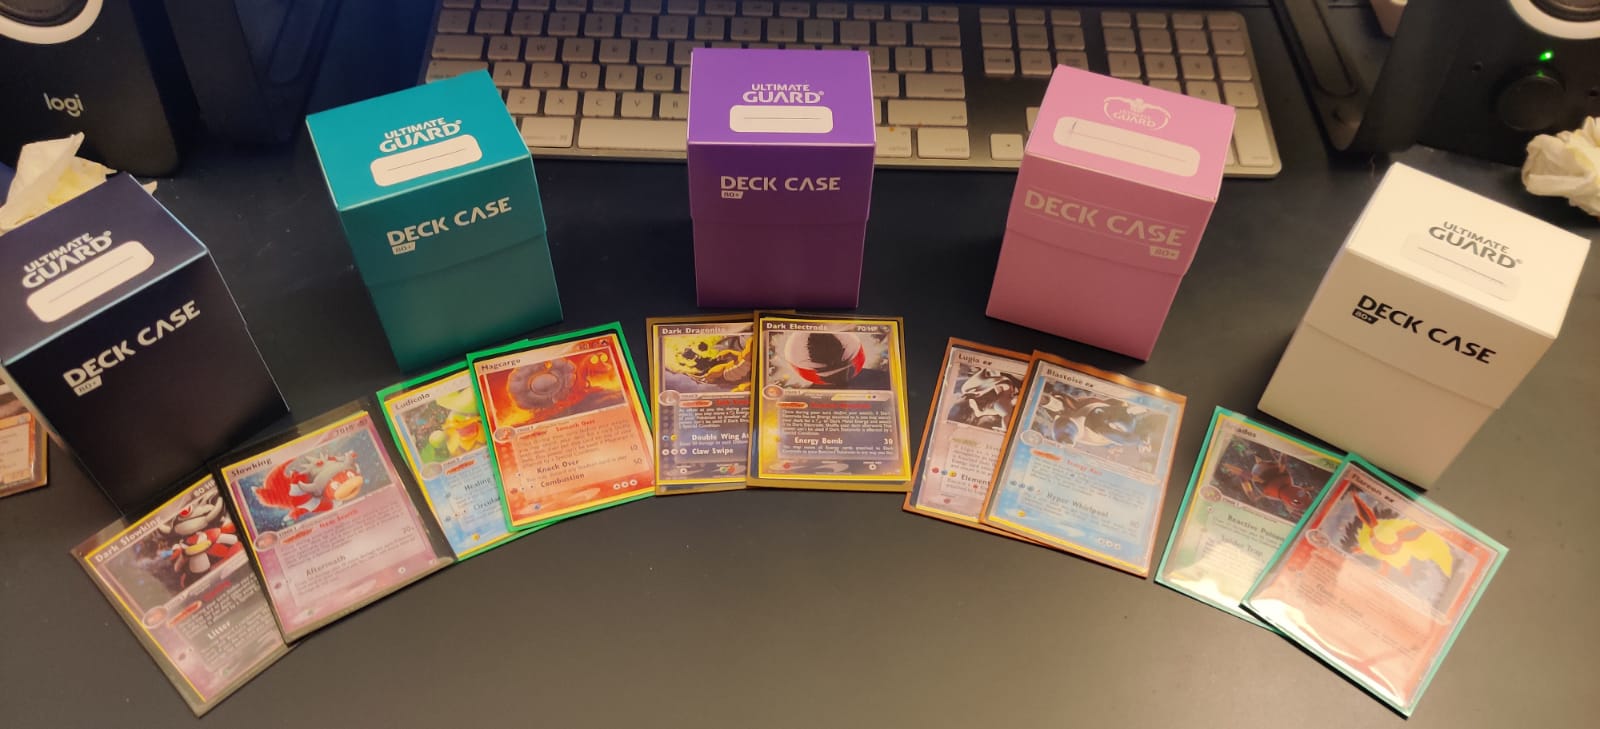 Five different color deck boxes in a fan formation and in front of each there are two Pokemon cards unique to decks that live in those boxes